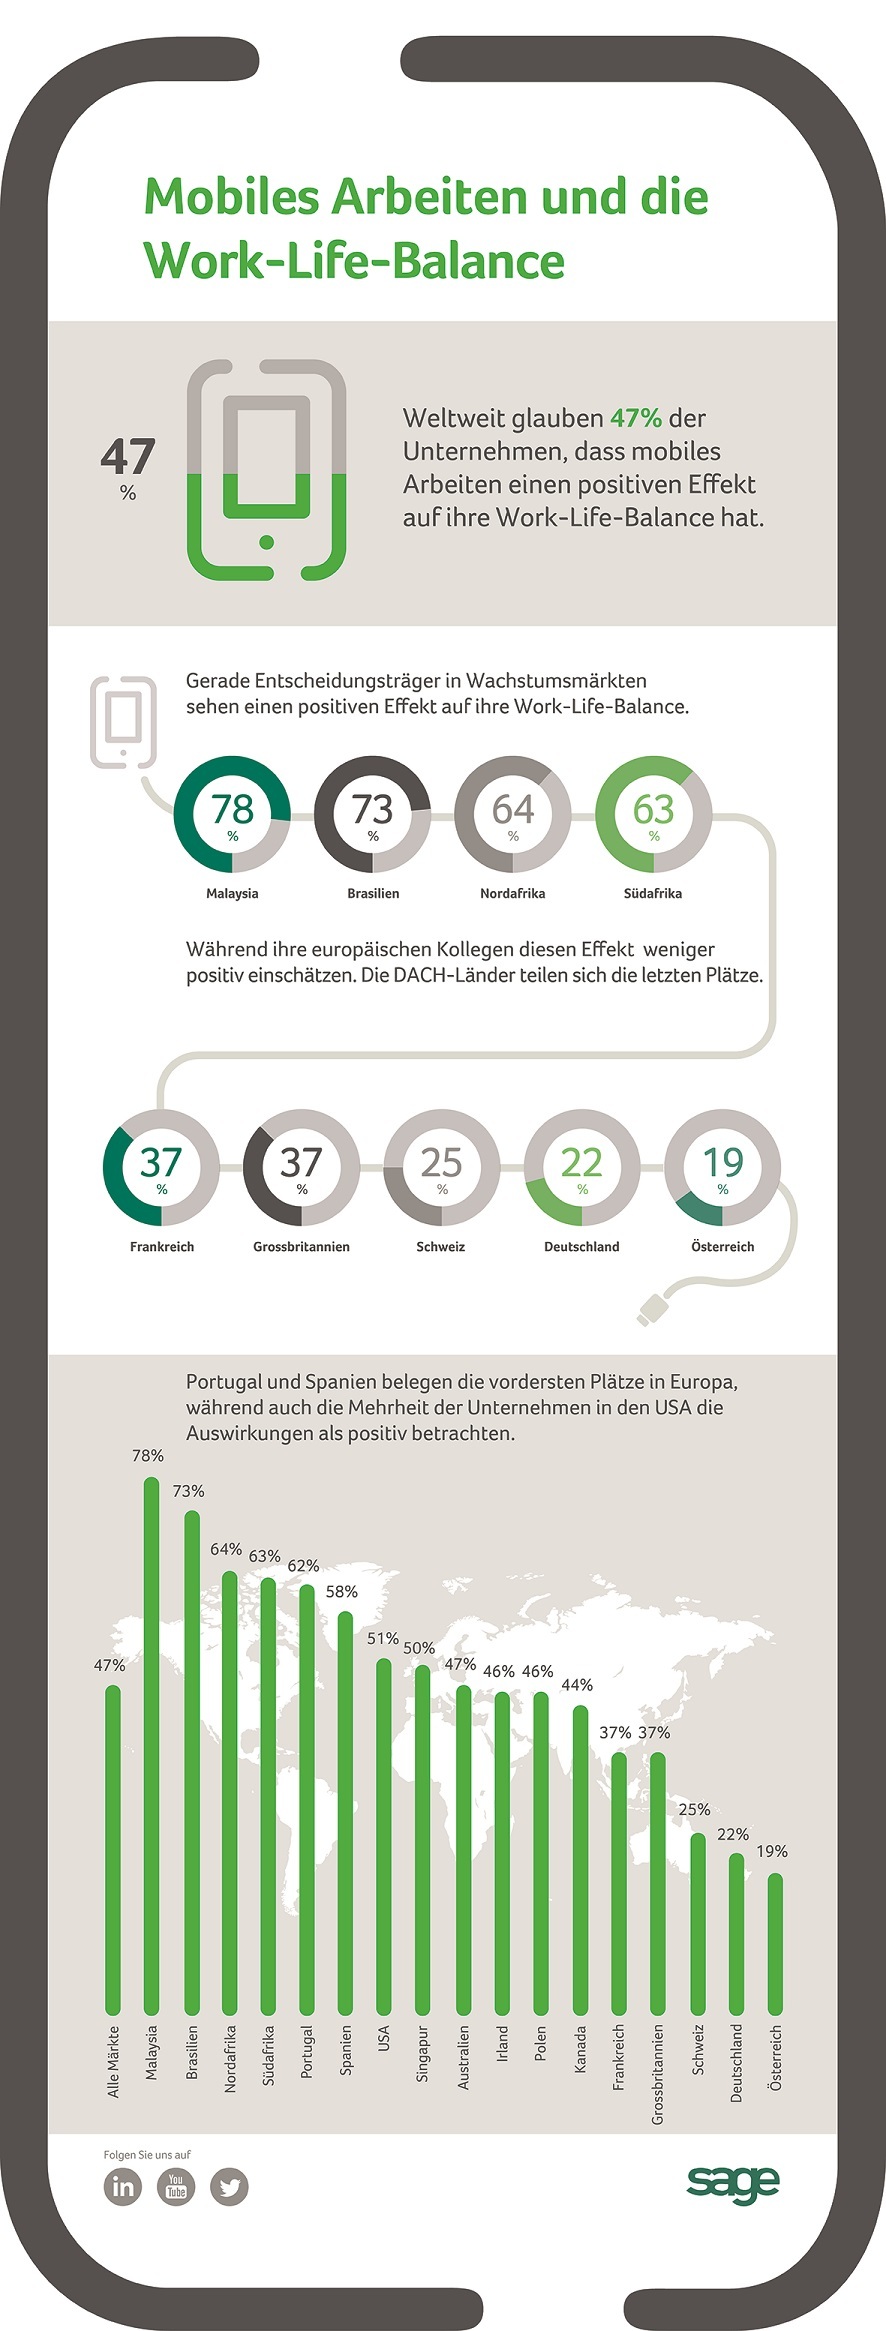 Sage_MobileWorld_Infographic_ch